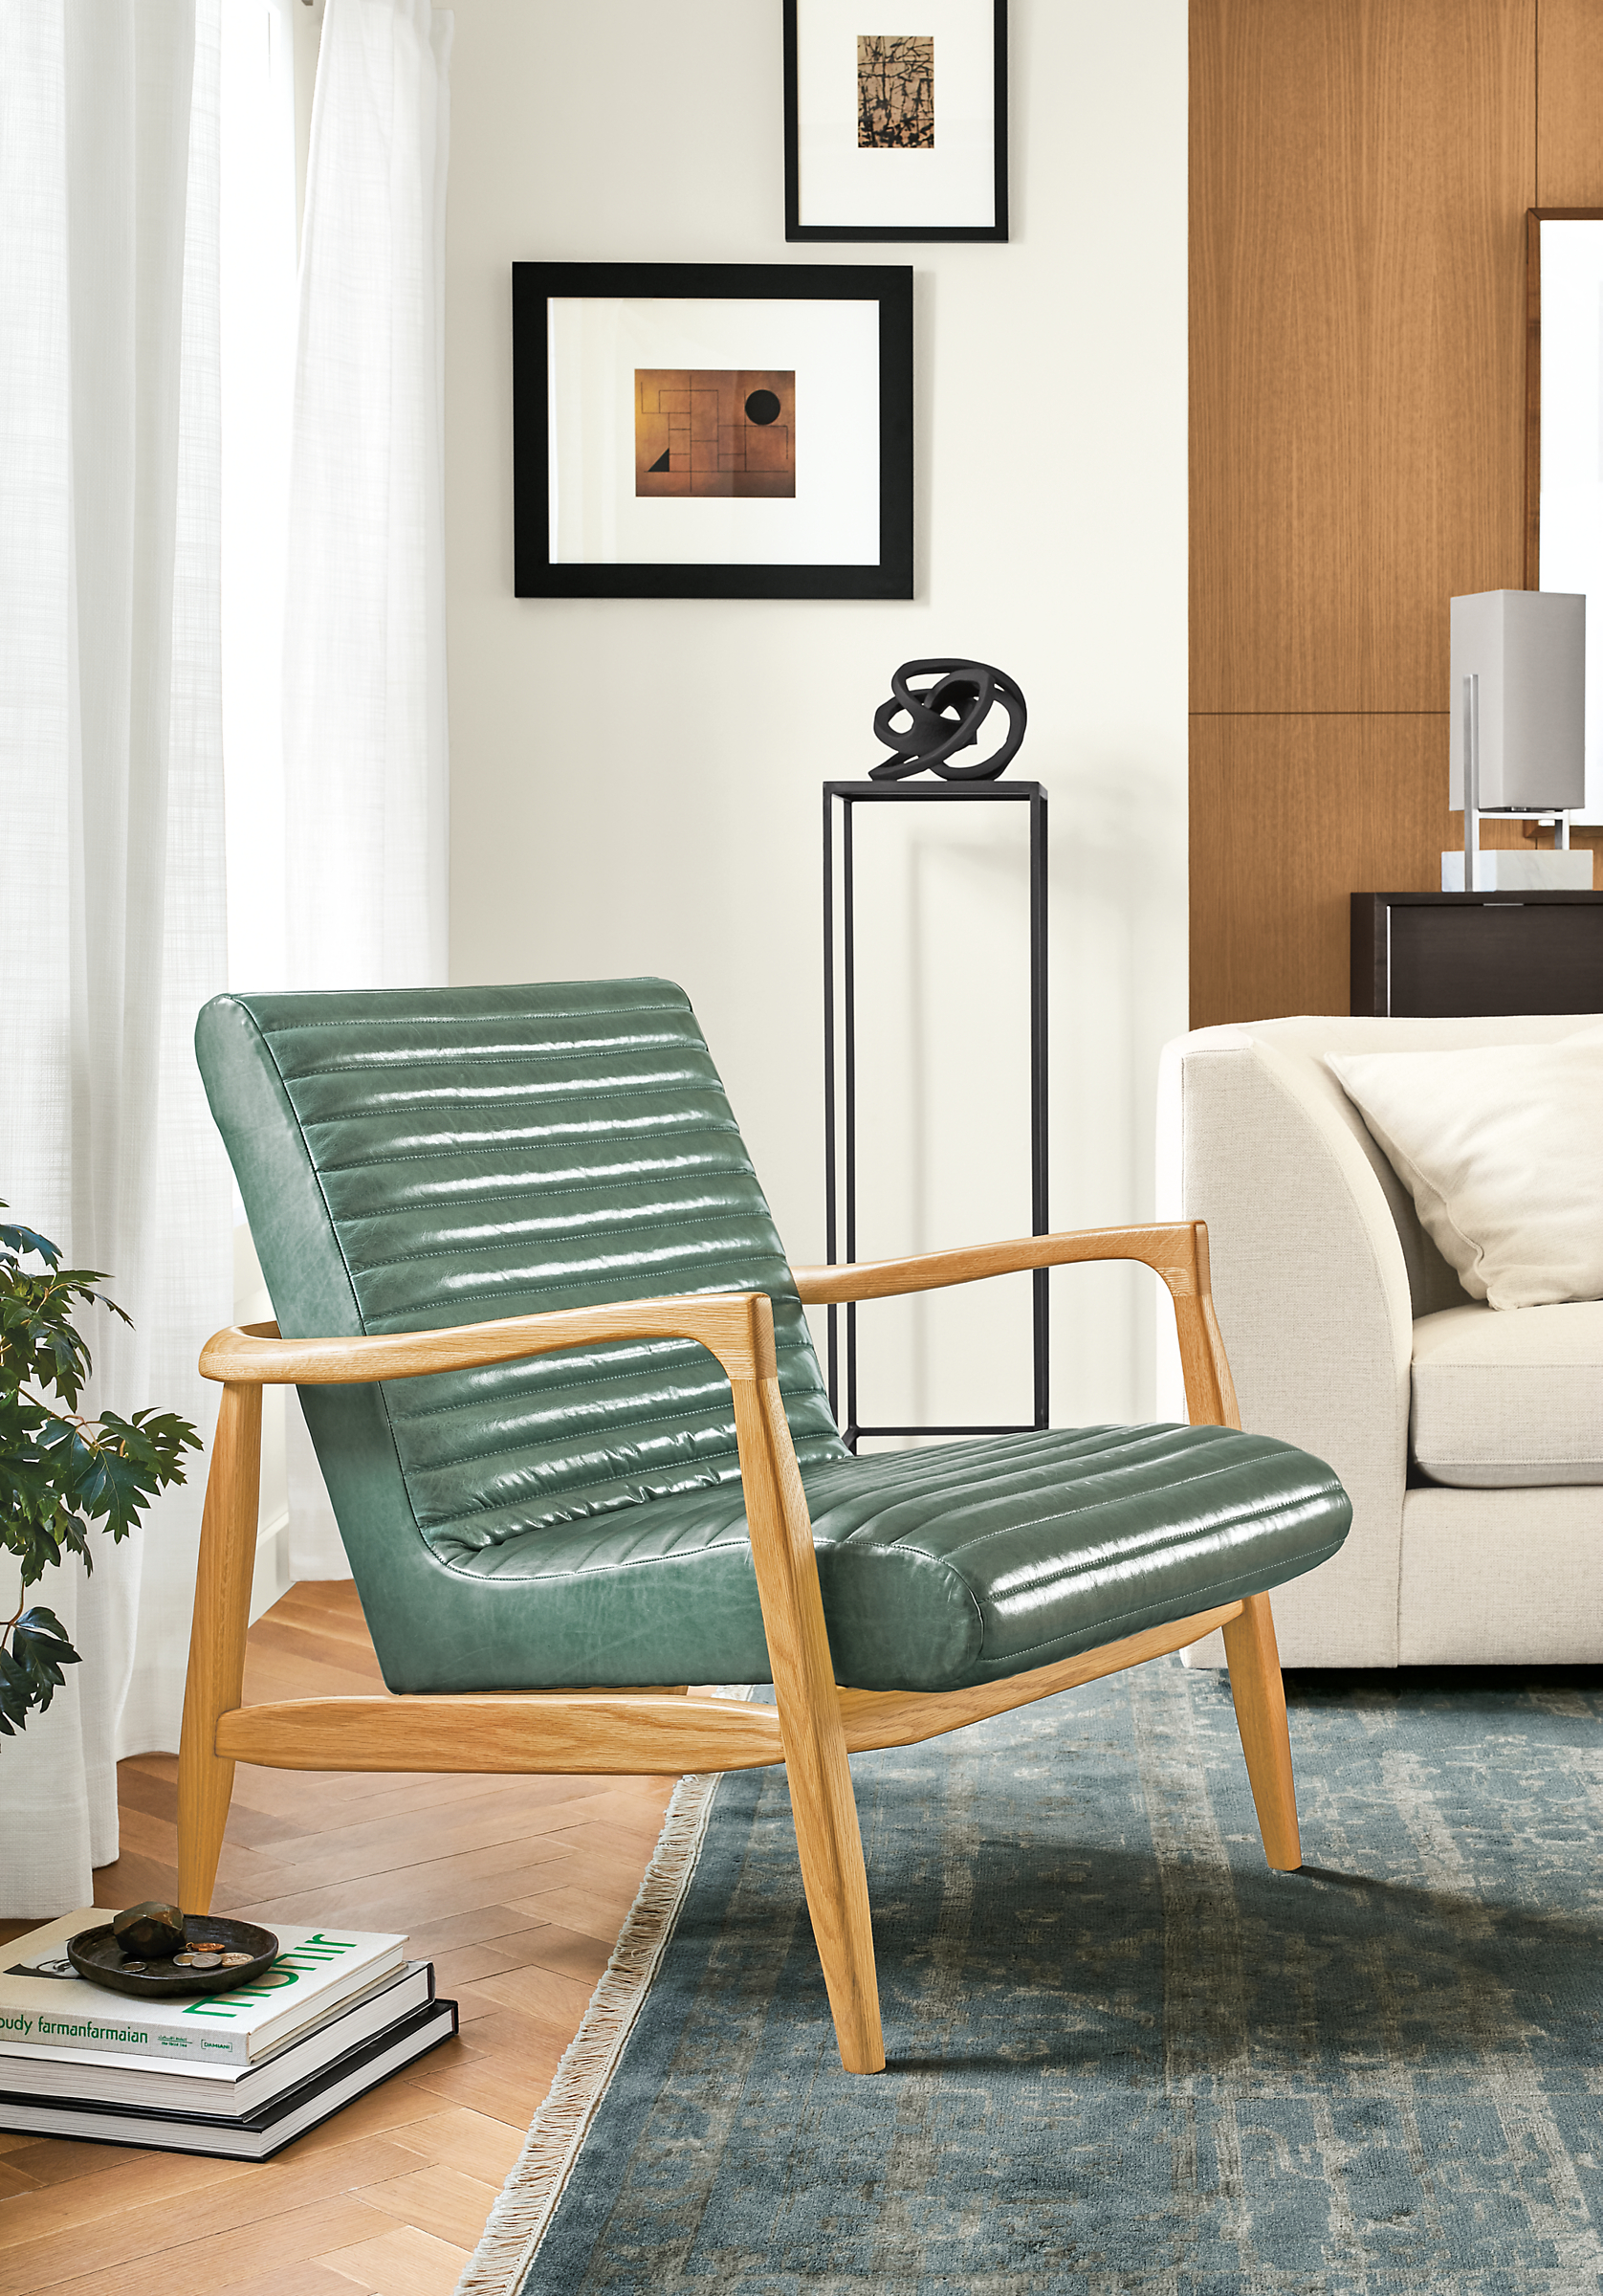 Detail of Callan chair in white oak and Vento teal leather in living room setting.